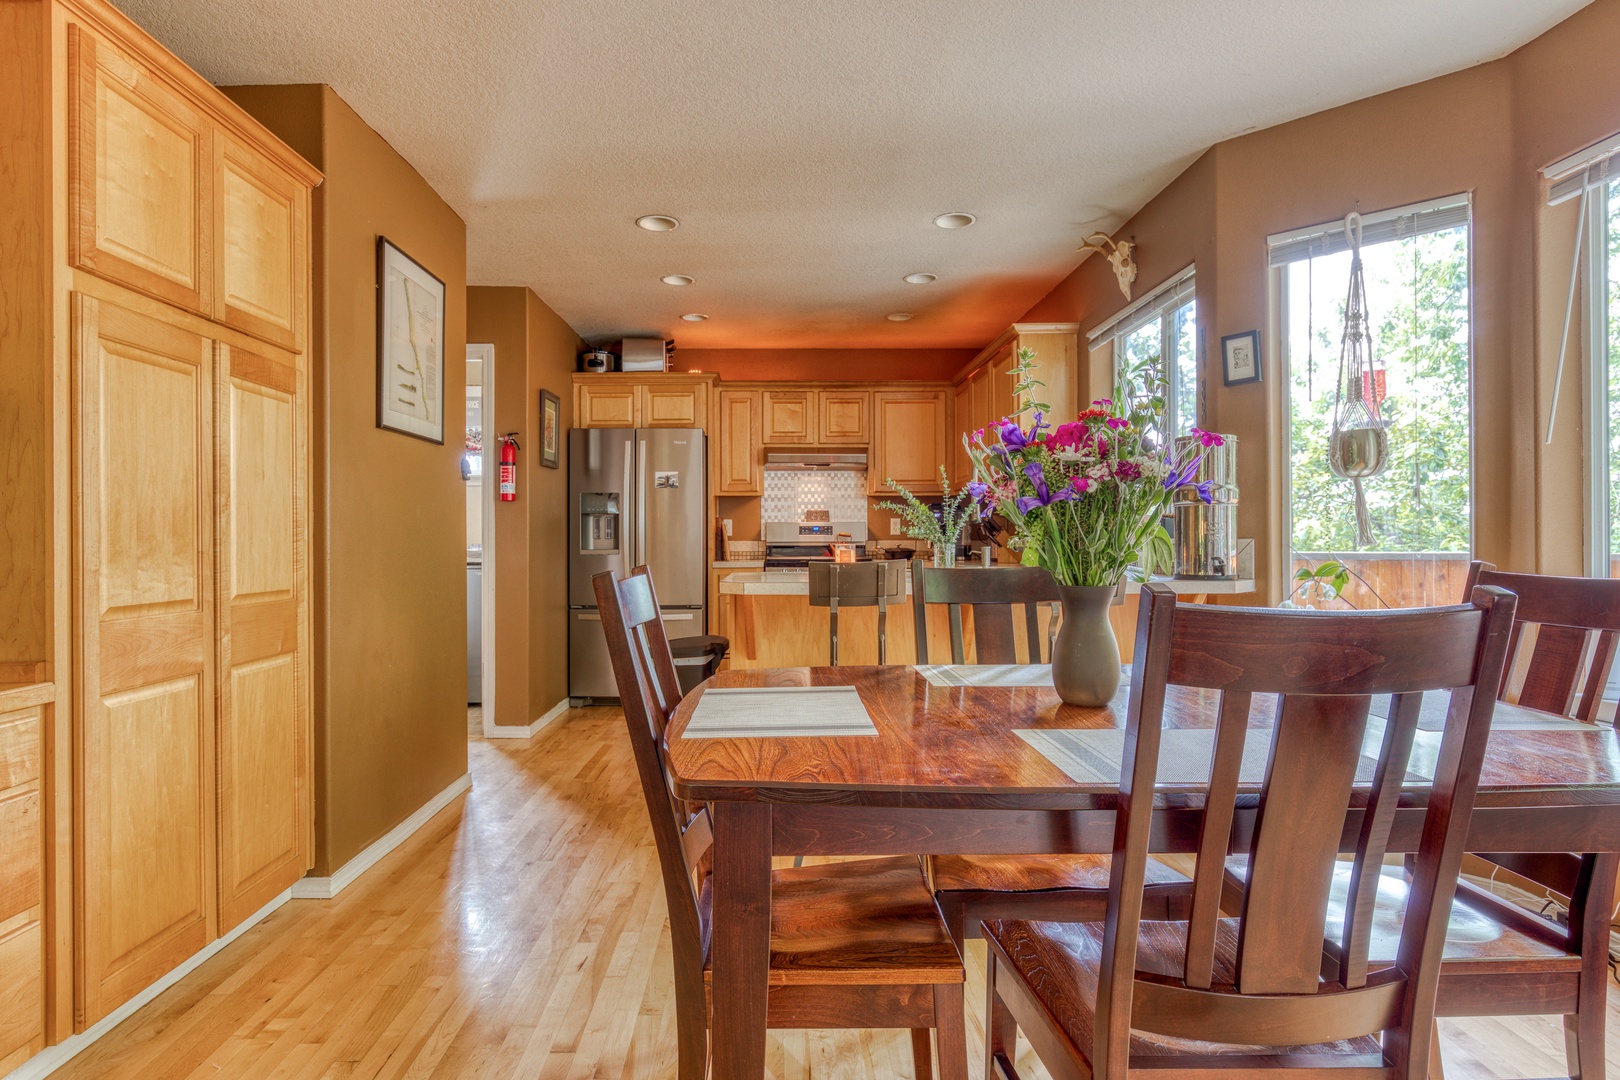 Clackamas Vacation Rentals, Duck Crossing - Enjoy a delicious meal here with loved ones